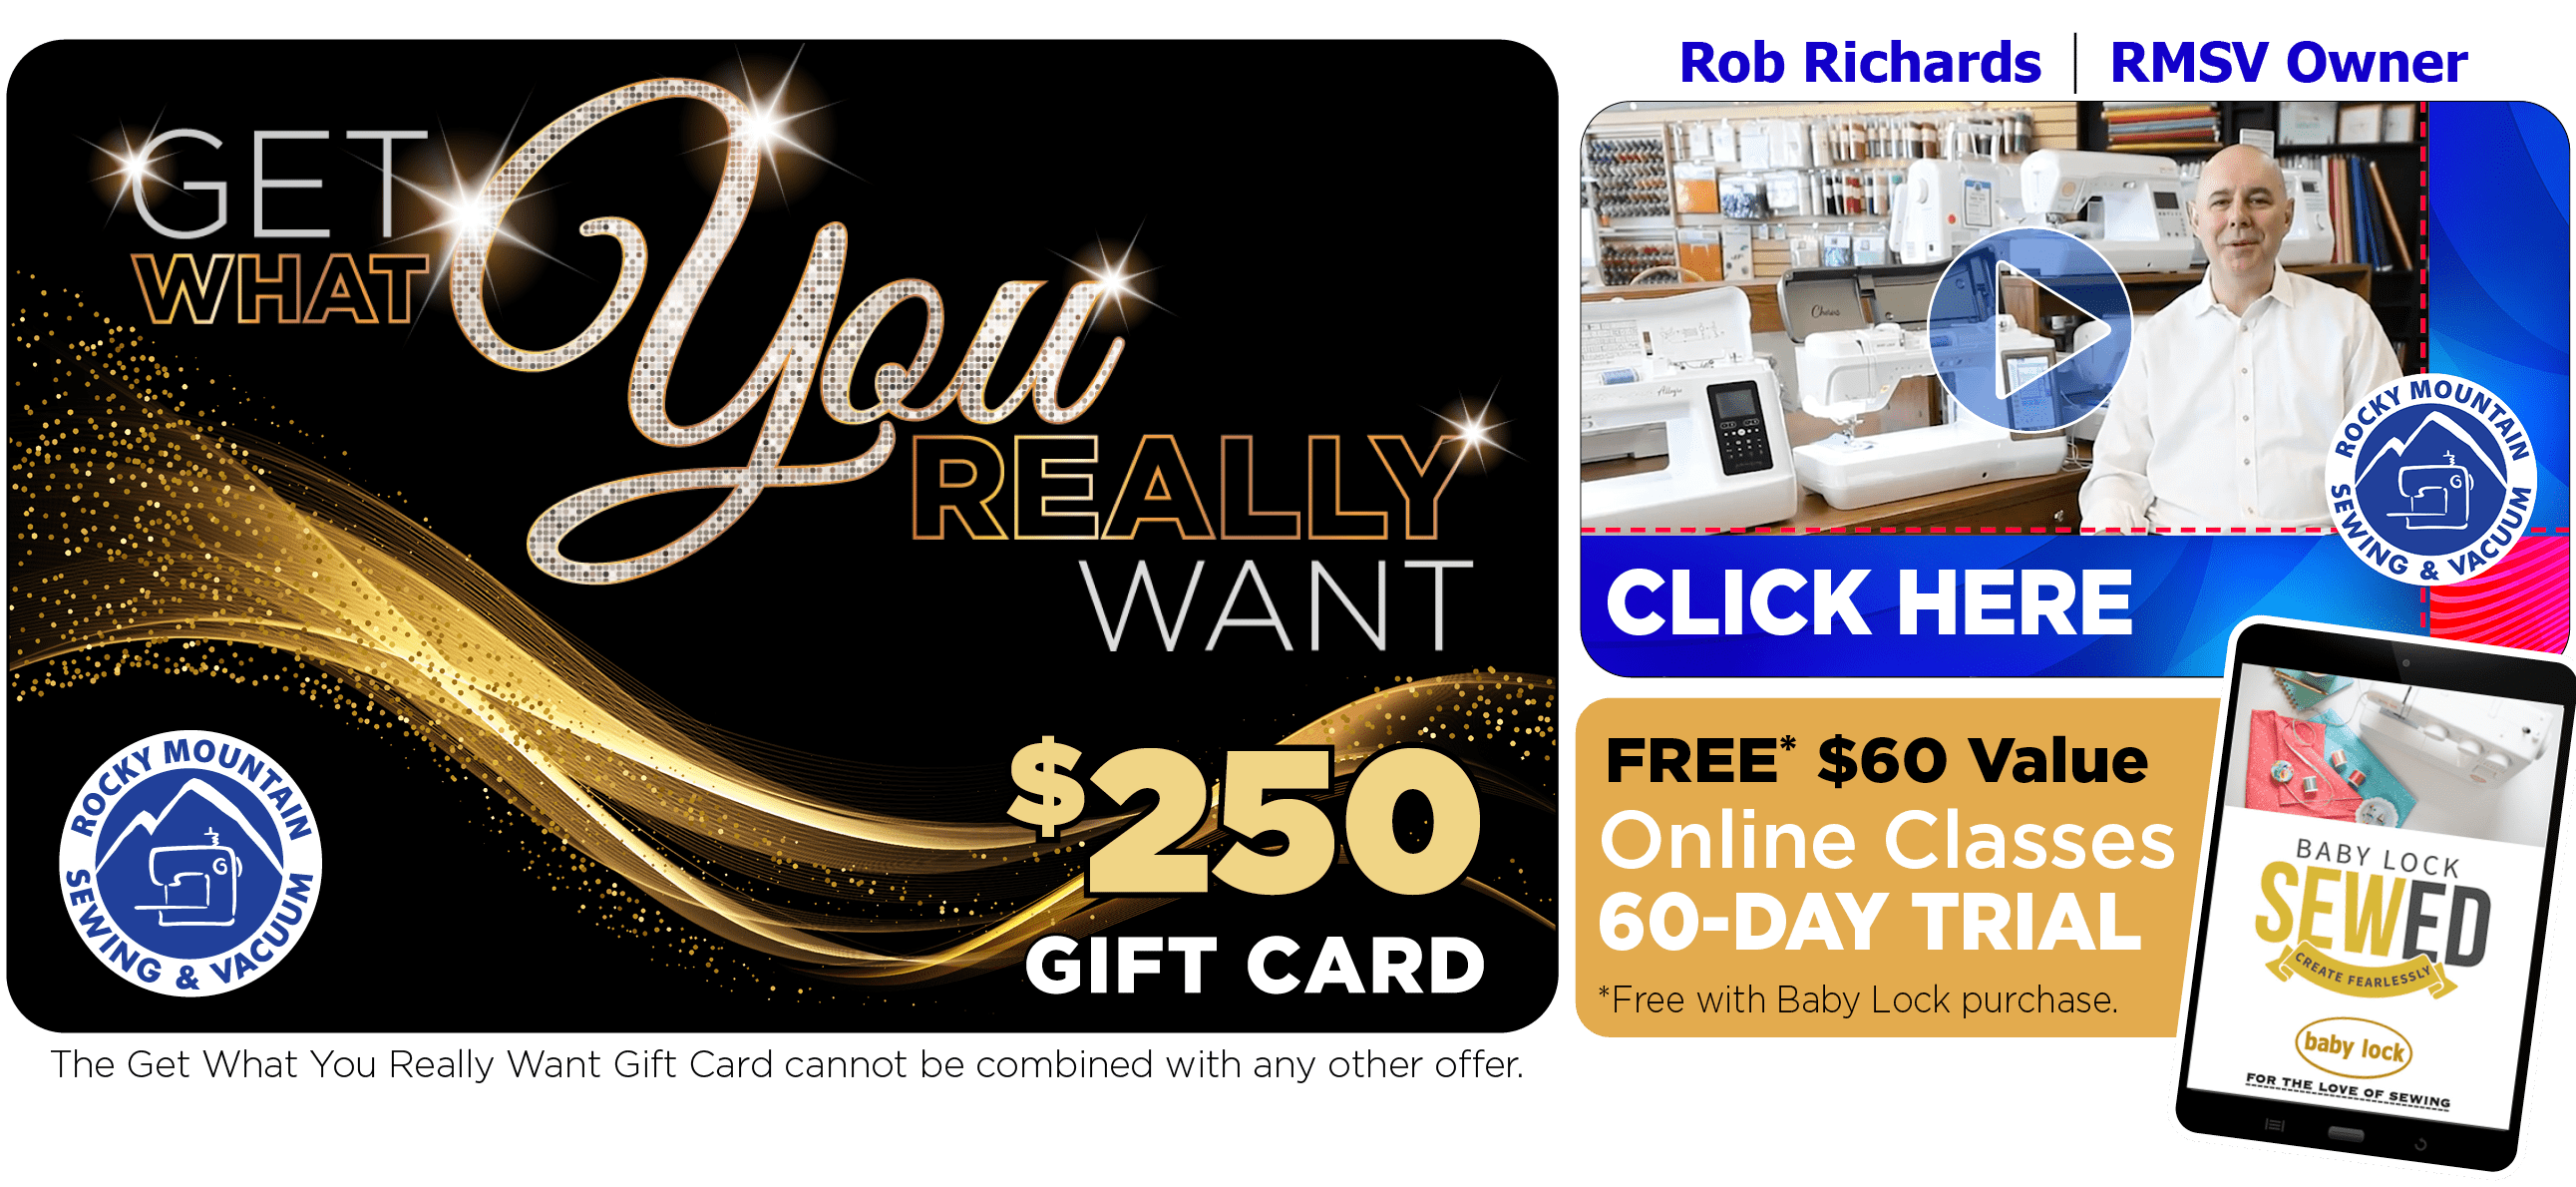 Get What You Really Want $250 Gift Card with Purchase